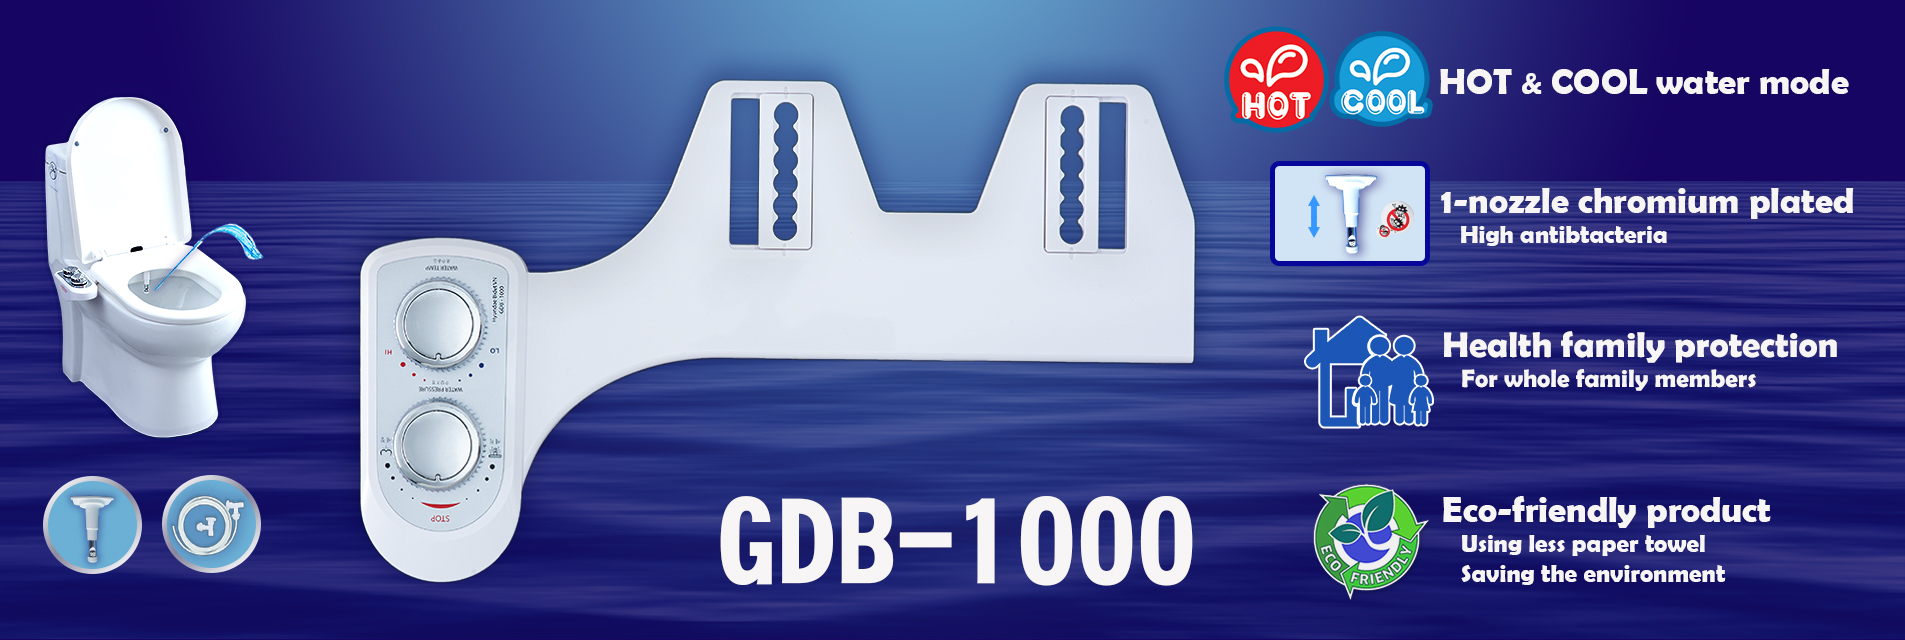 GDB-1000 bidet with Hot & Cold water